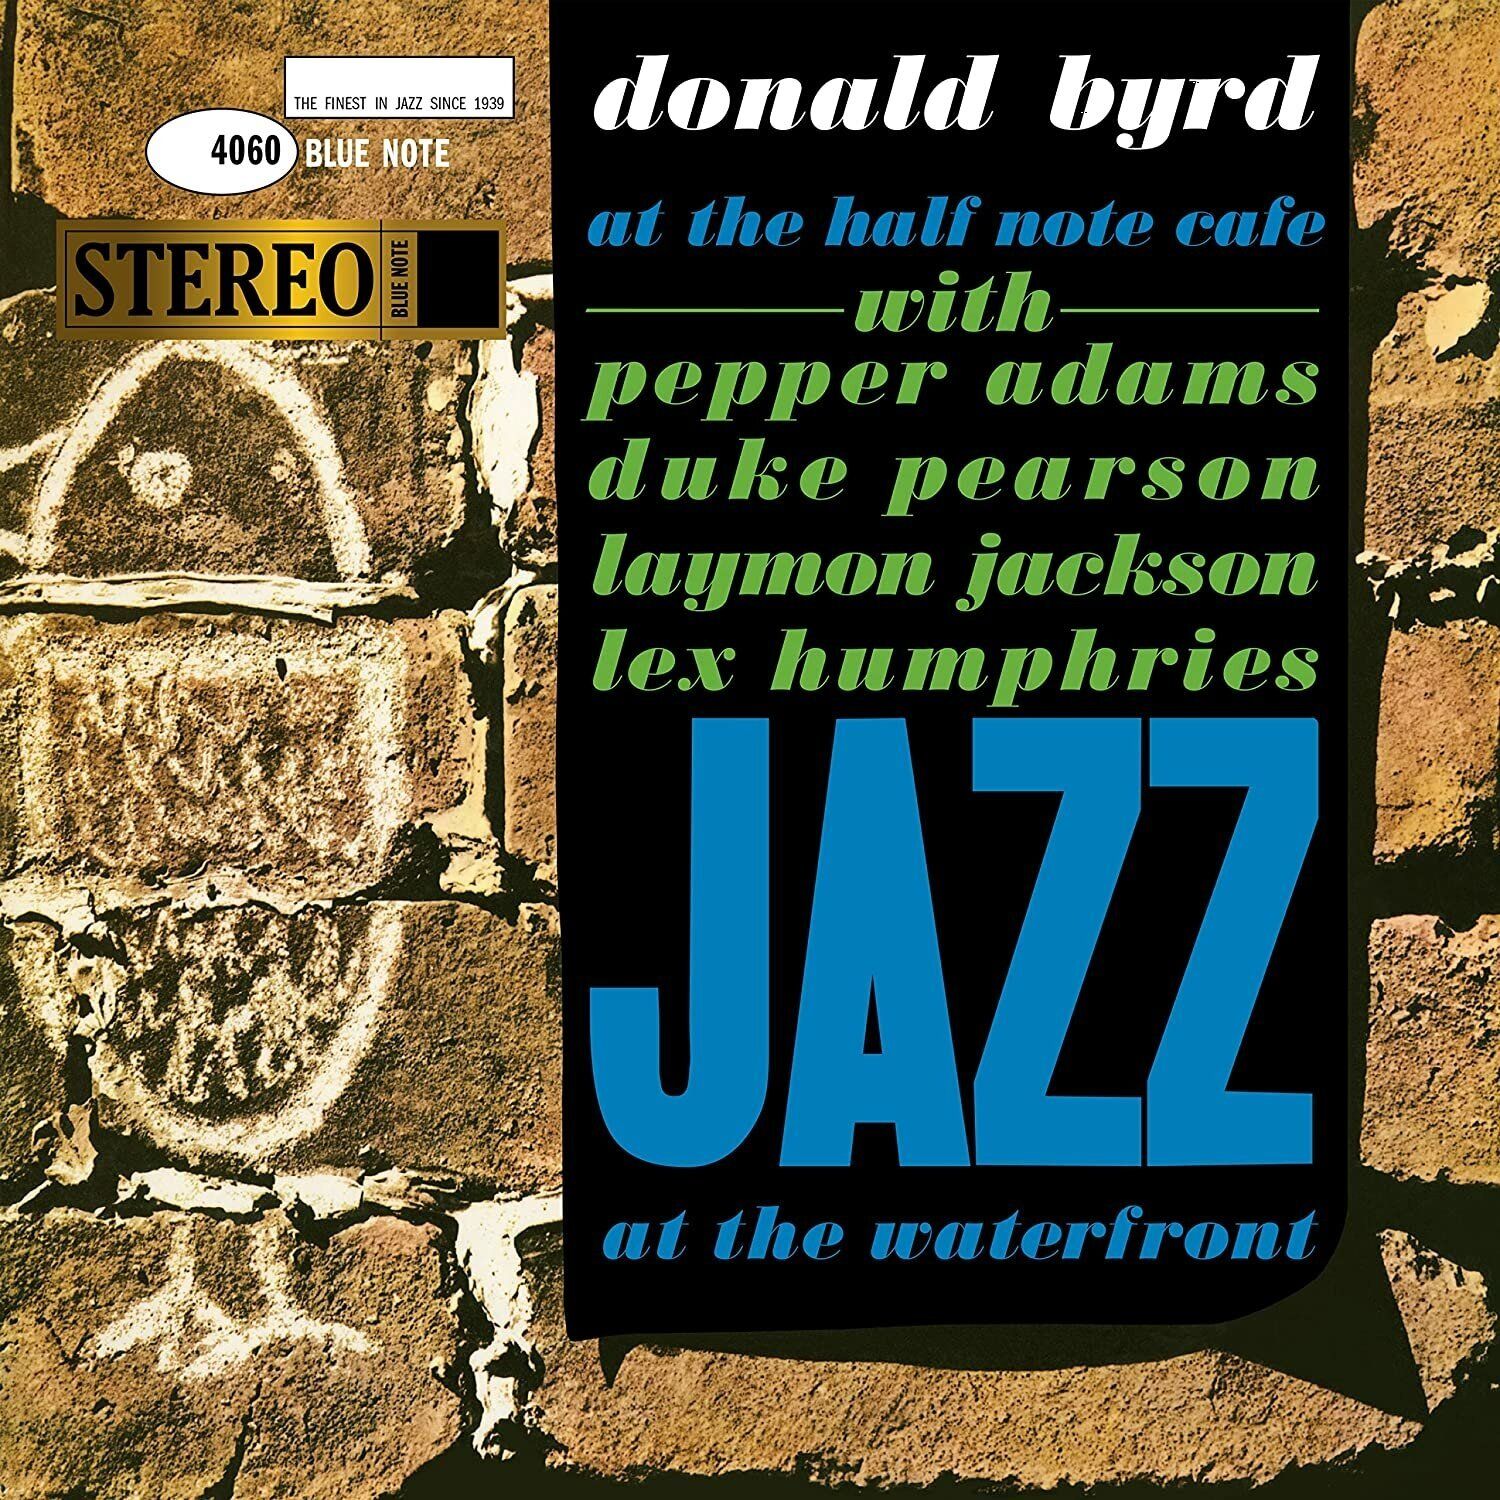 виниловая пластинка byrd donald jazz at the waterfront donald byrd at the half note cafe 0602438145867, Виниловая пластинка Byrd, Donald, At The Half Note Cafe (Tone Poet)